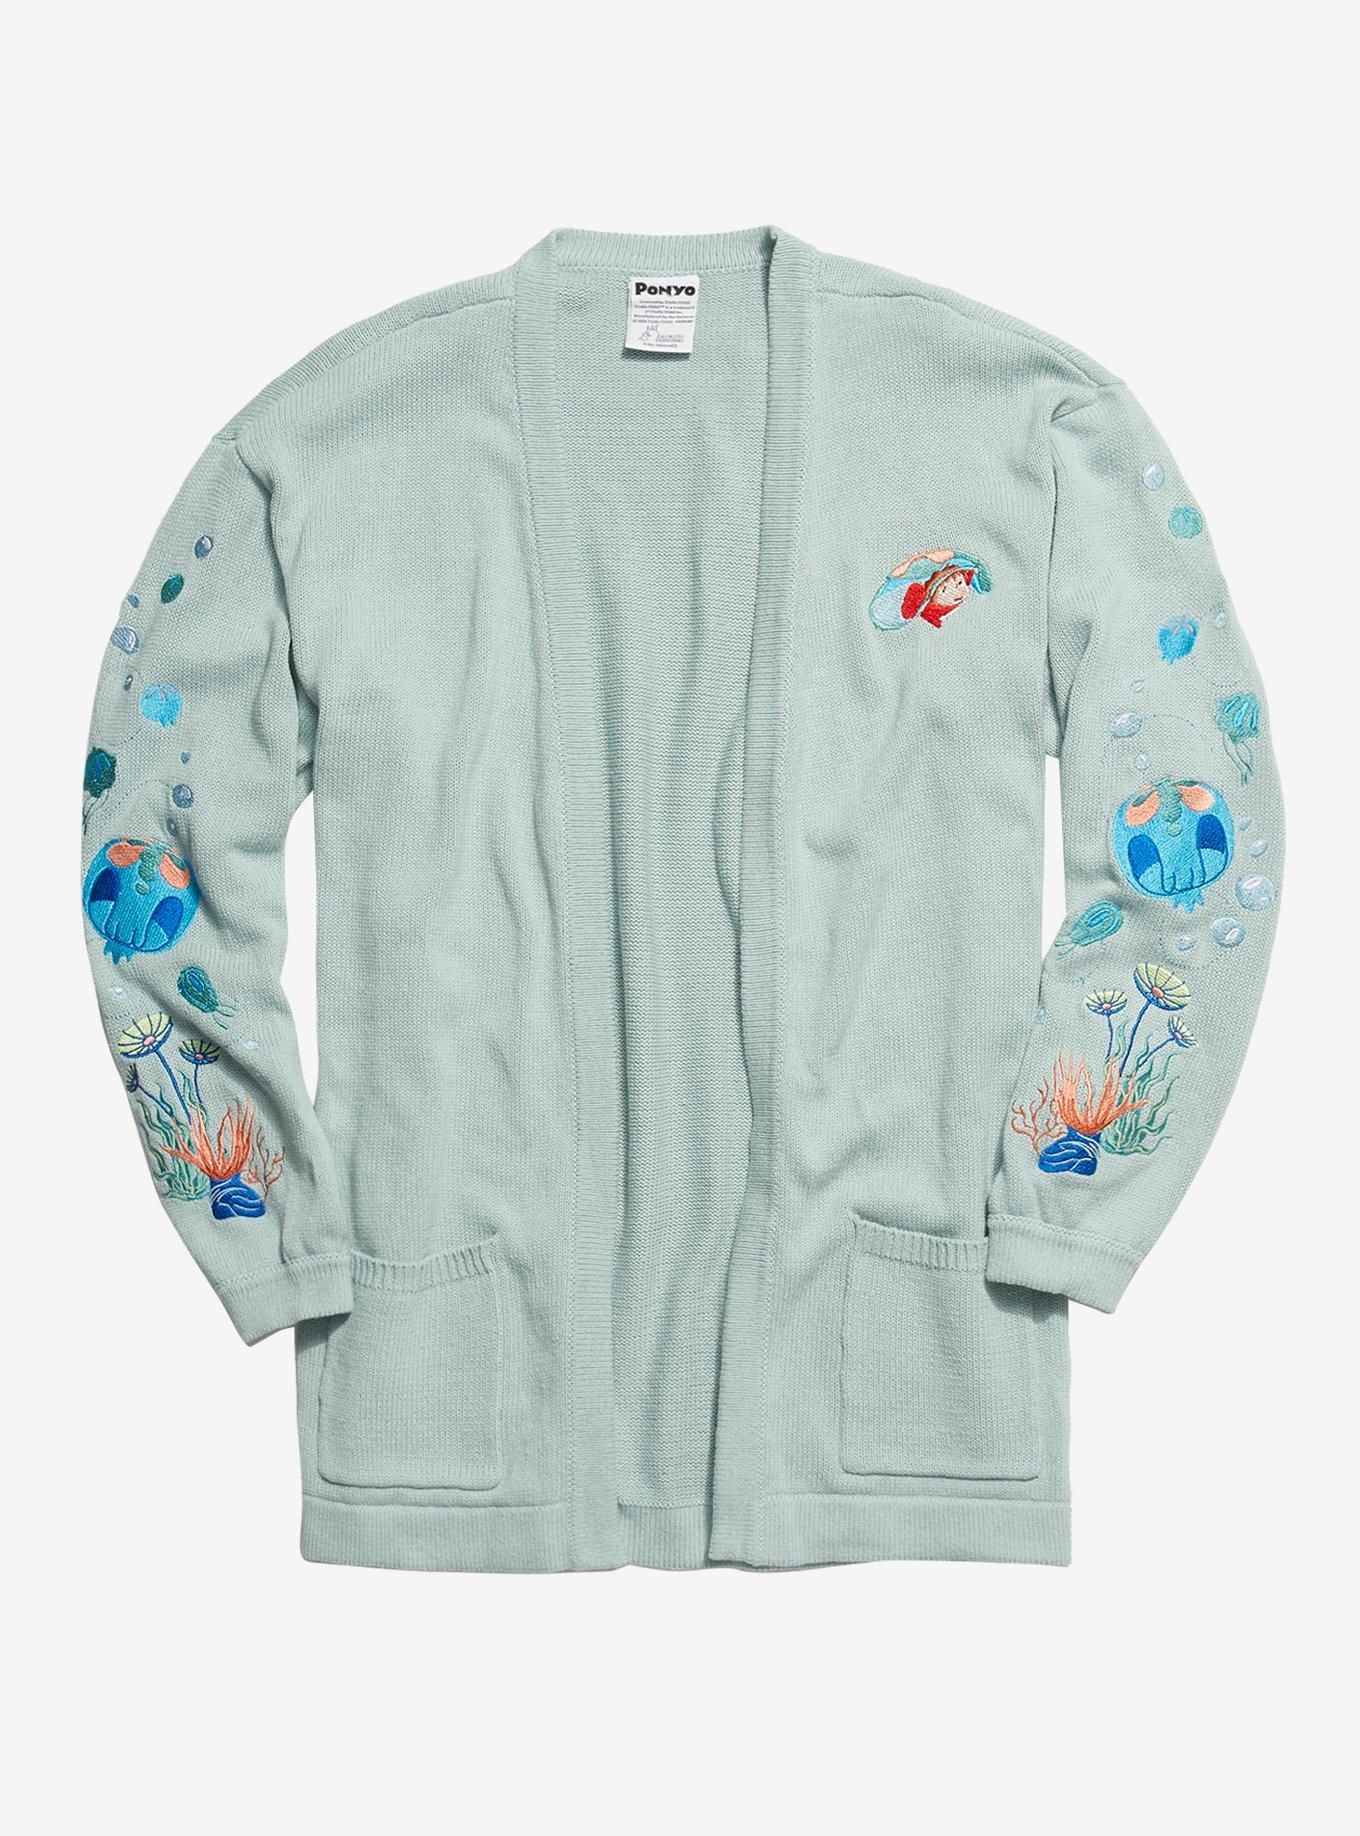 Her Universe Studio Ghibli Earth Day Collection Ponyo Bubbles Embroidered  Oversized Girls Cardigan Plus Size